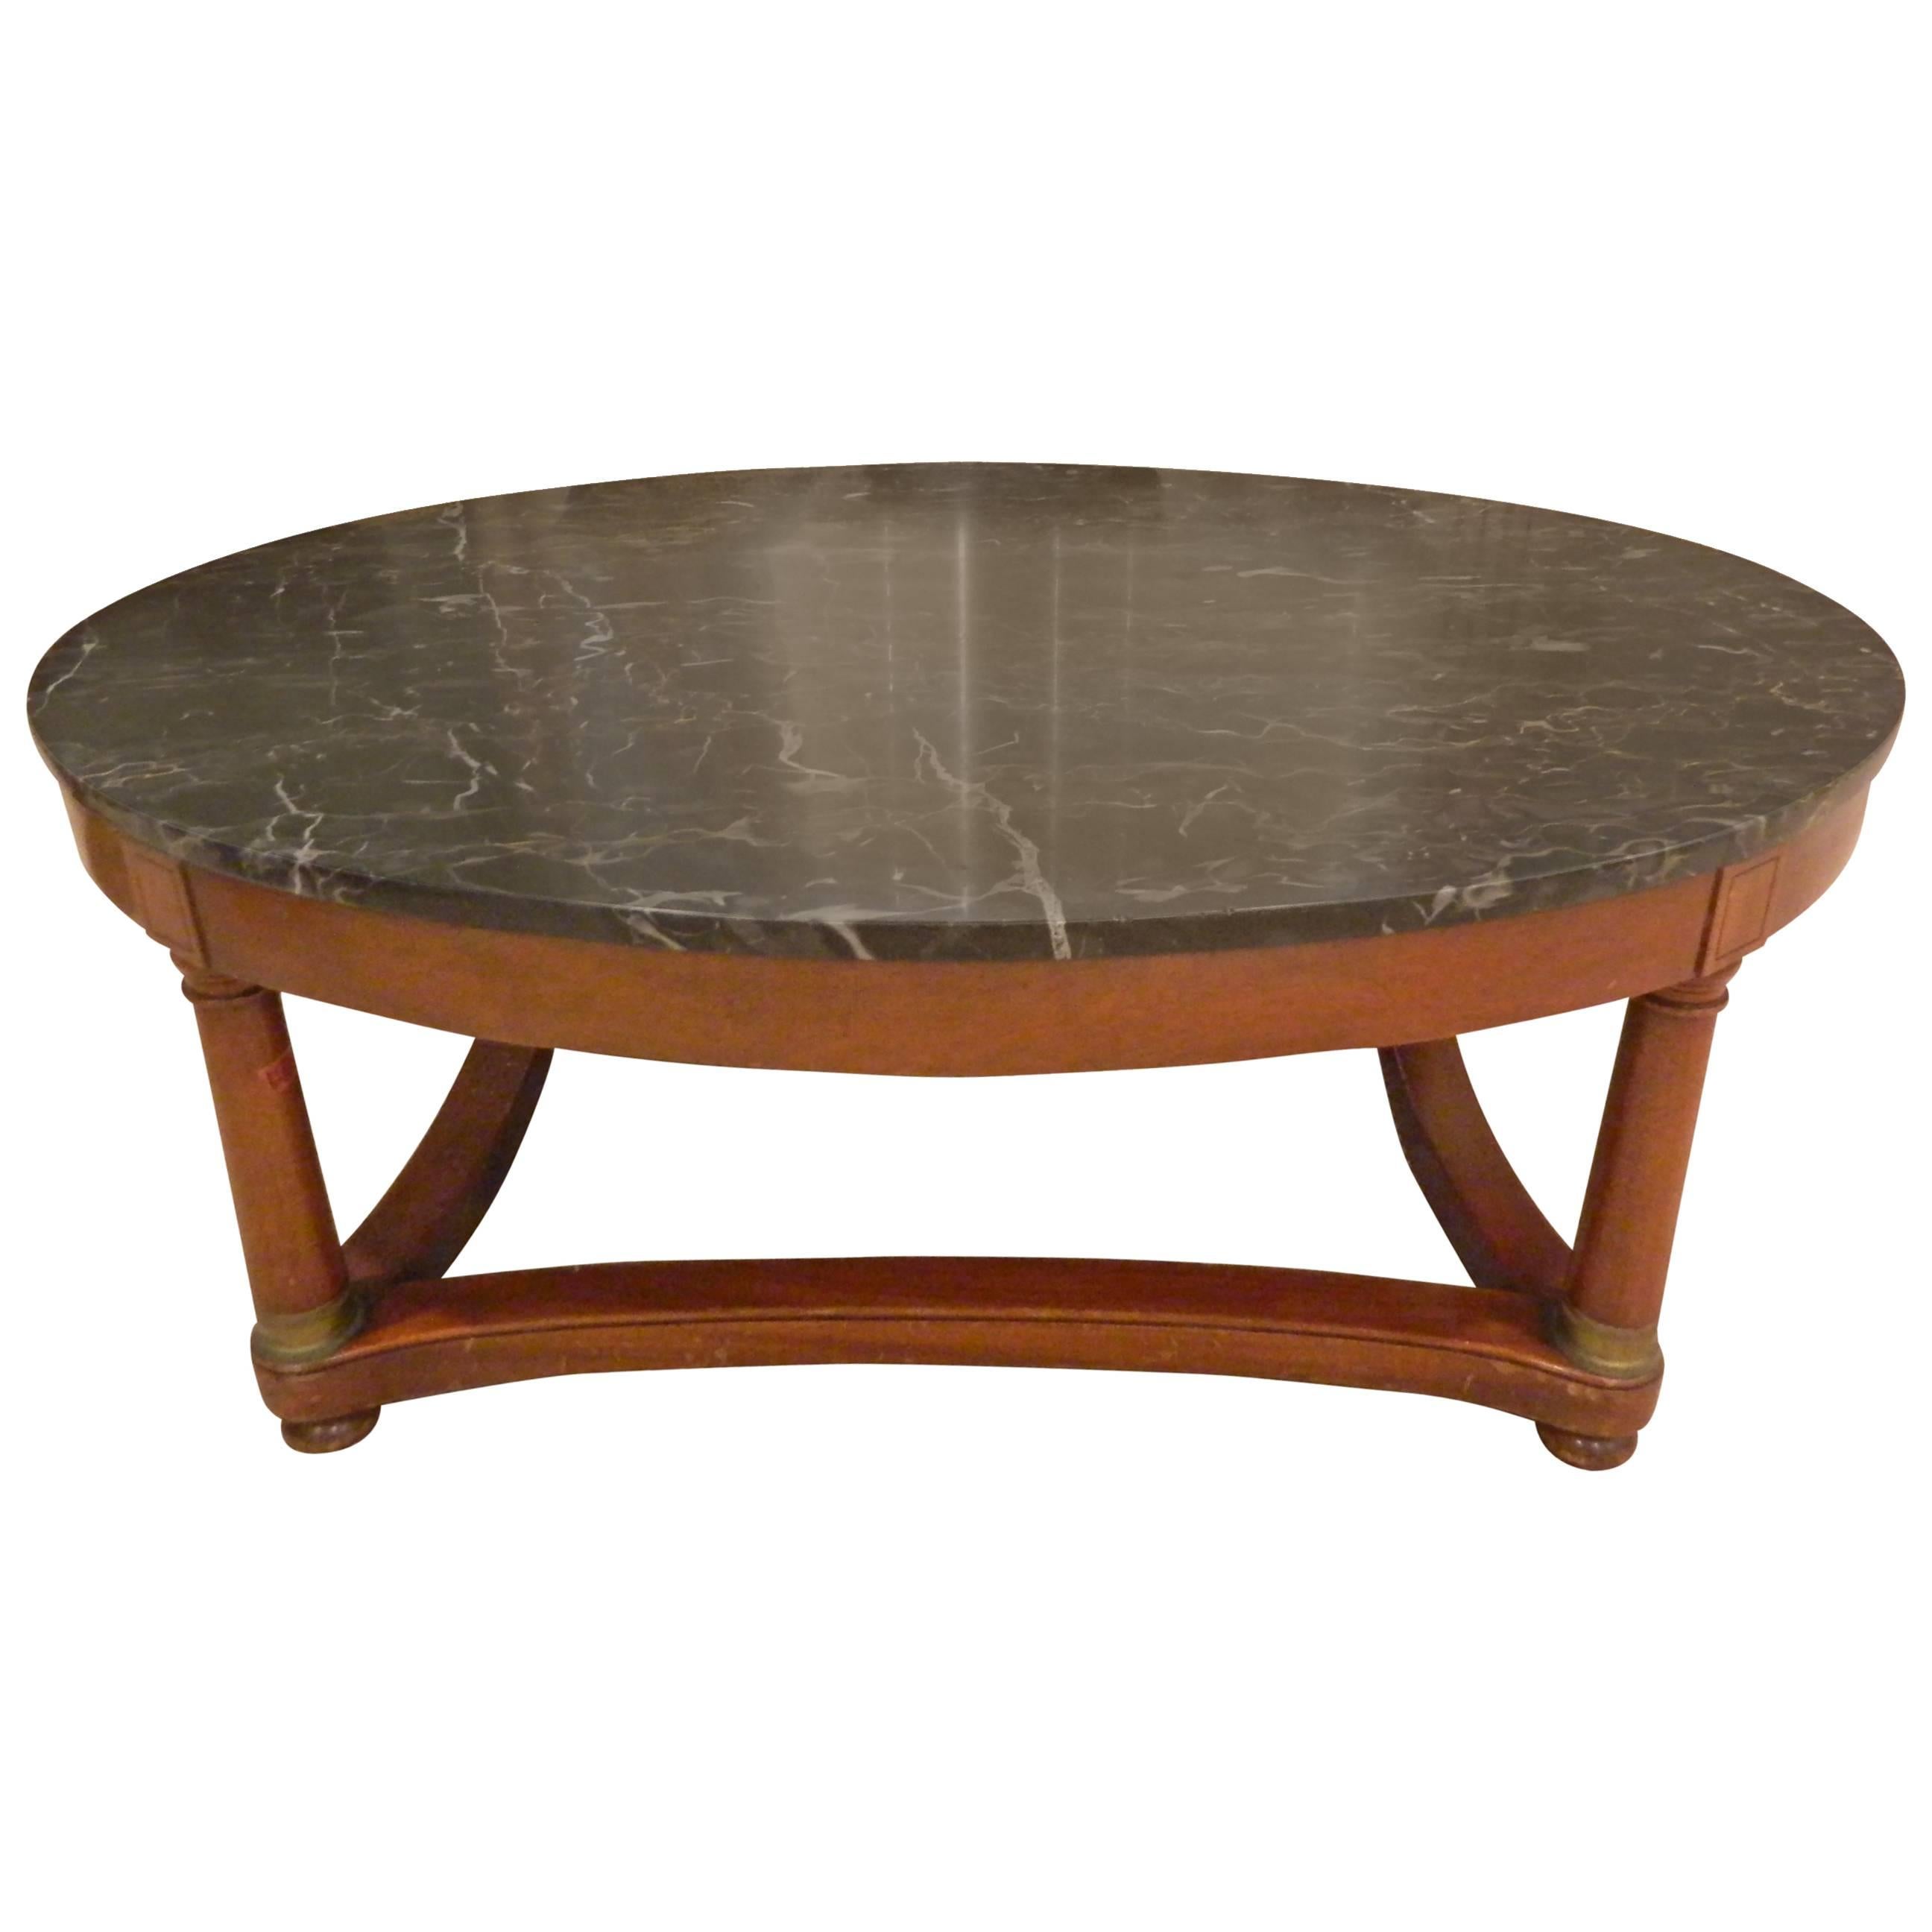 Empire Style Coffee Table with a Marble Top, Late 19th Century